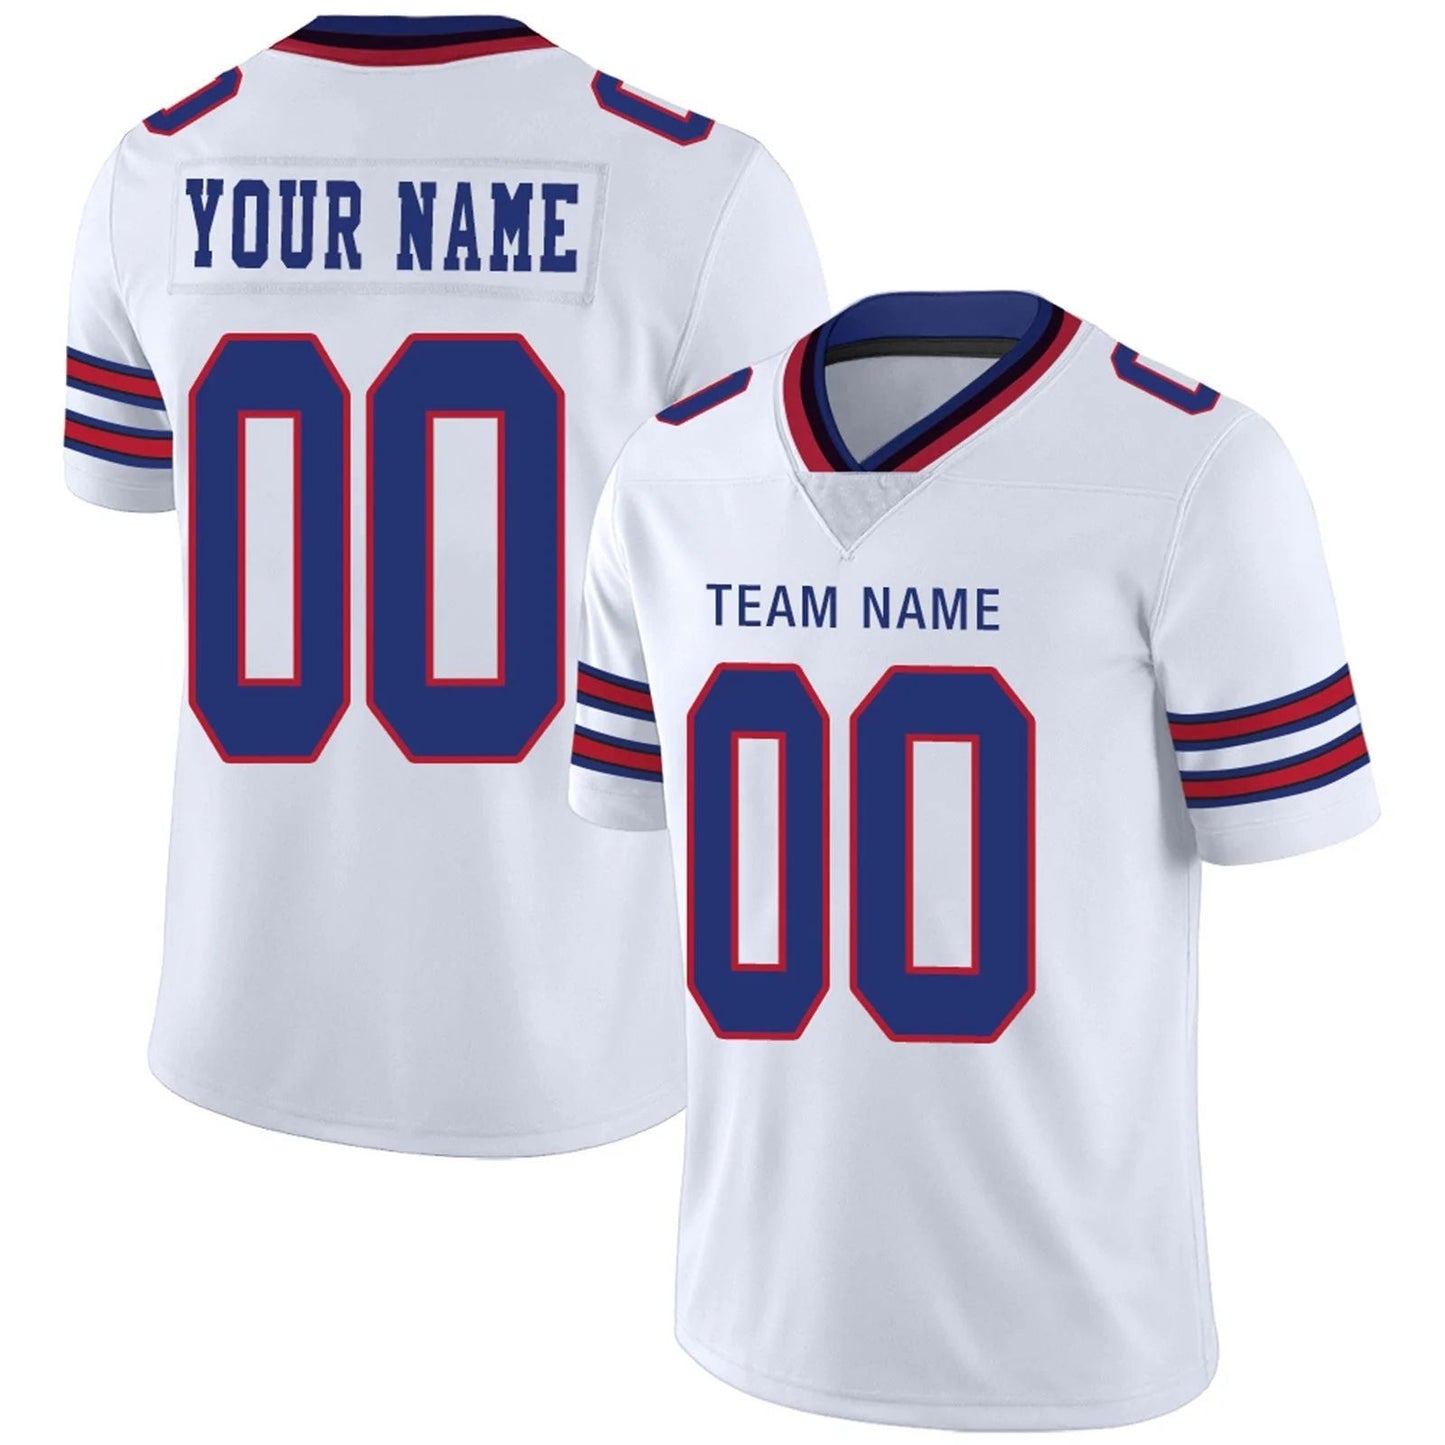 Football Jersey Custom B.Bills Team Player or Personalized Design Your Own Name for Men's Women's Youth Jerseys Royal